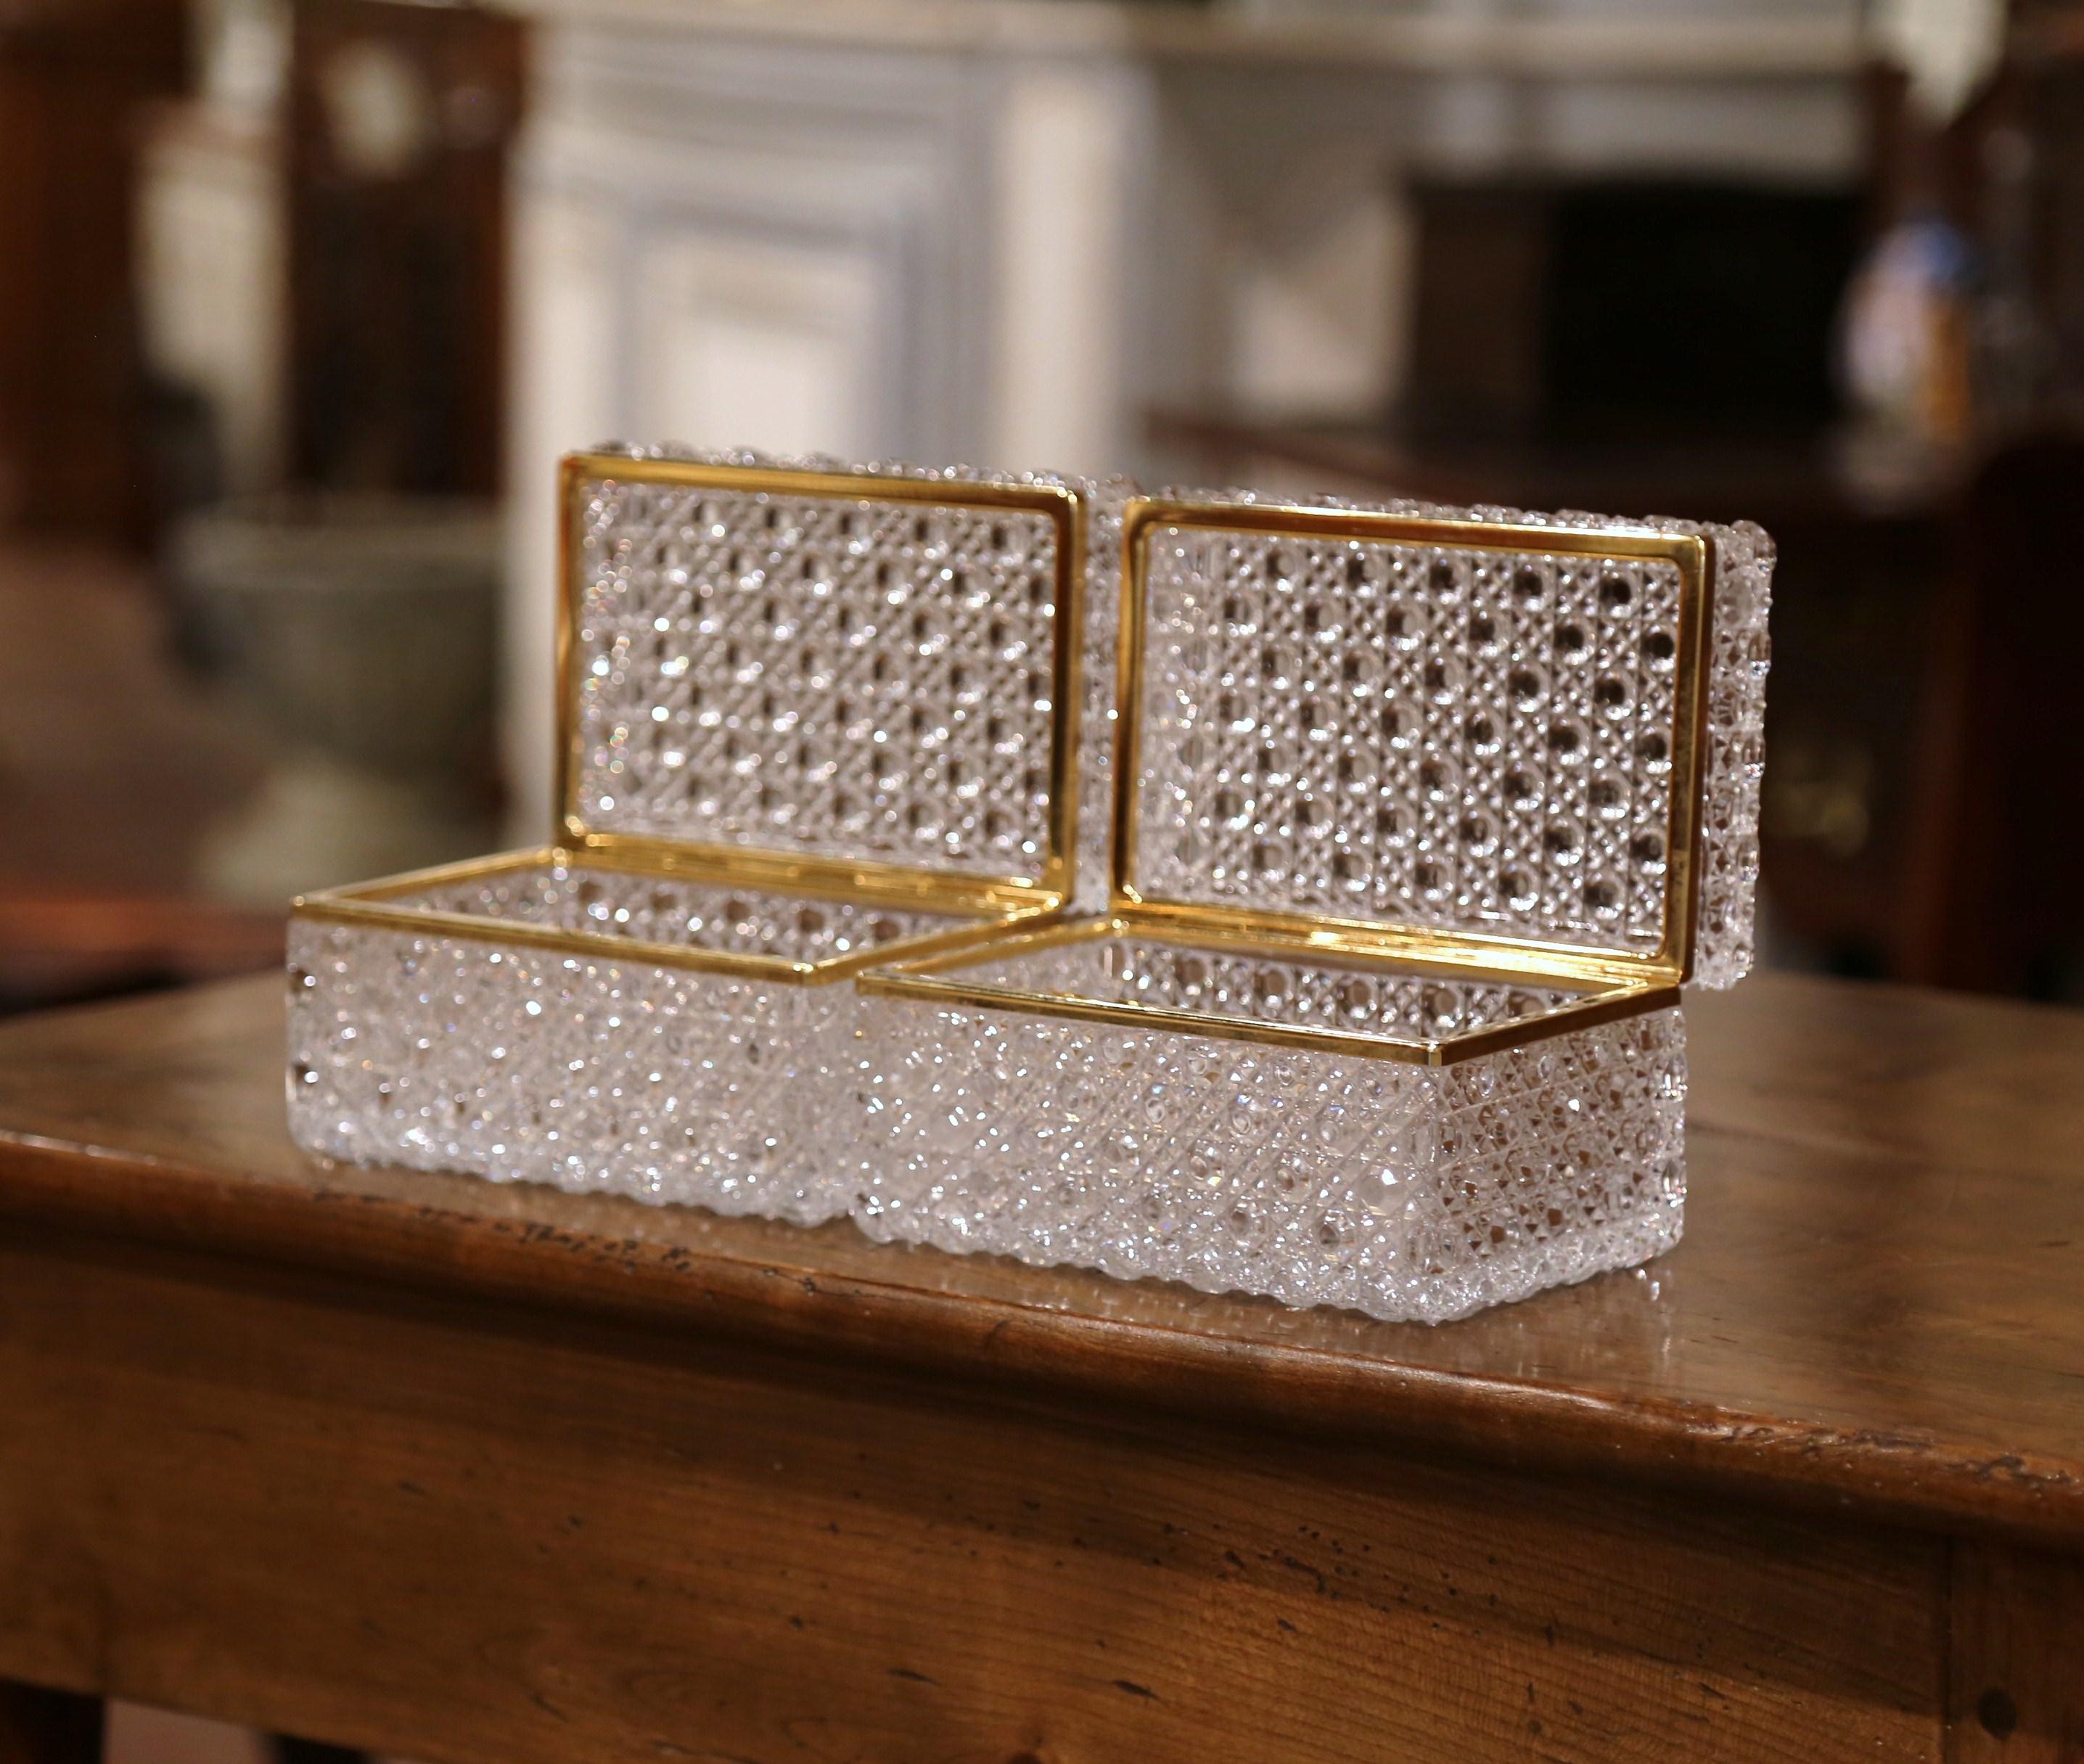 Hand-Crafted Pair of Early 20th Century French Baccarat Cut Glass and Brass Jewelry Boxes